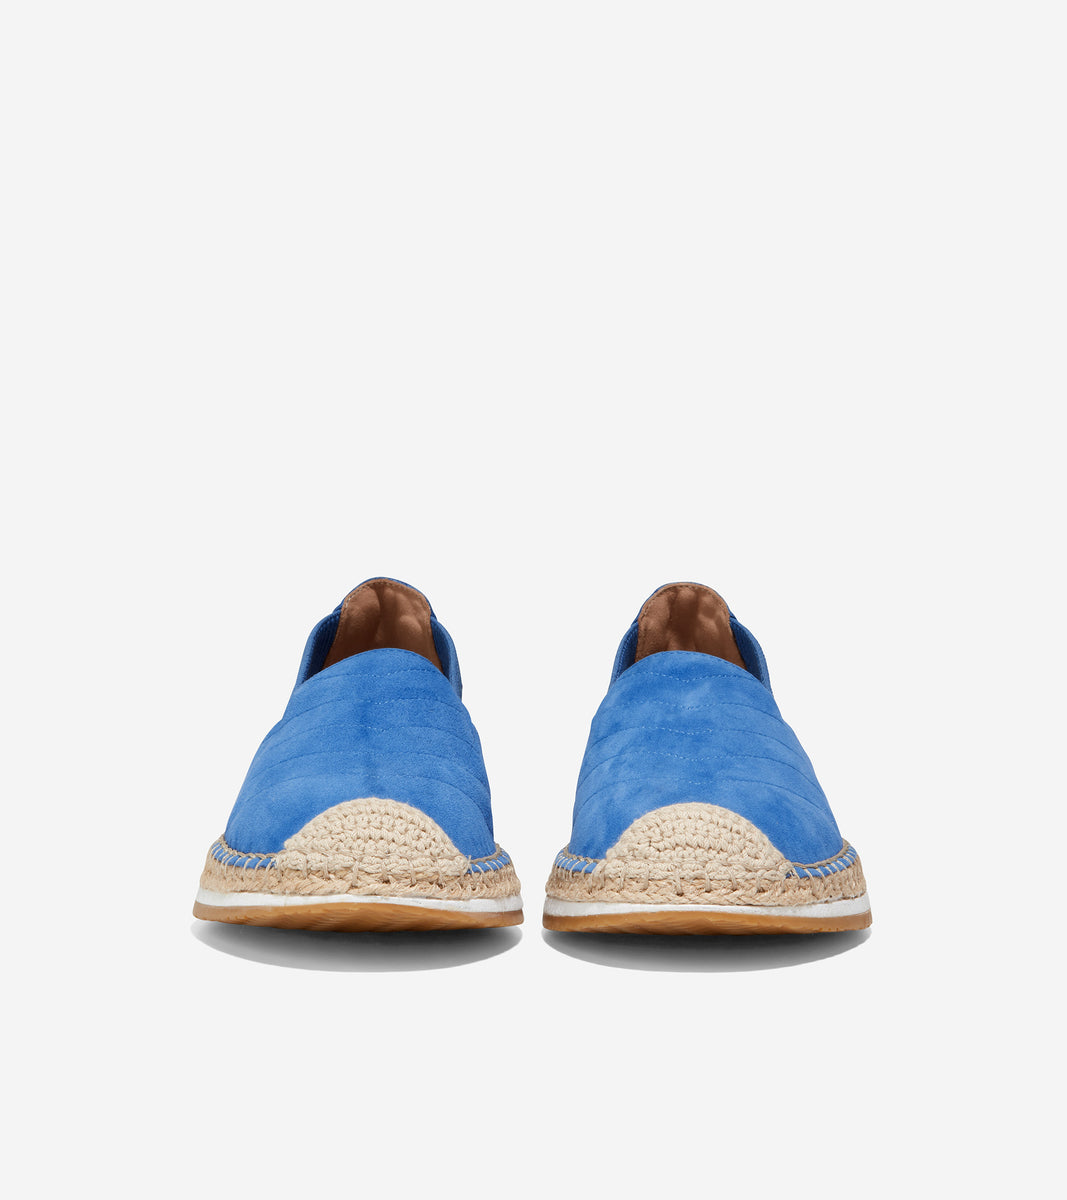 Cloudfeel Espadrille Loafer